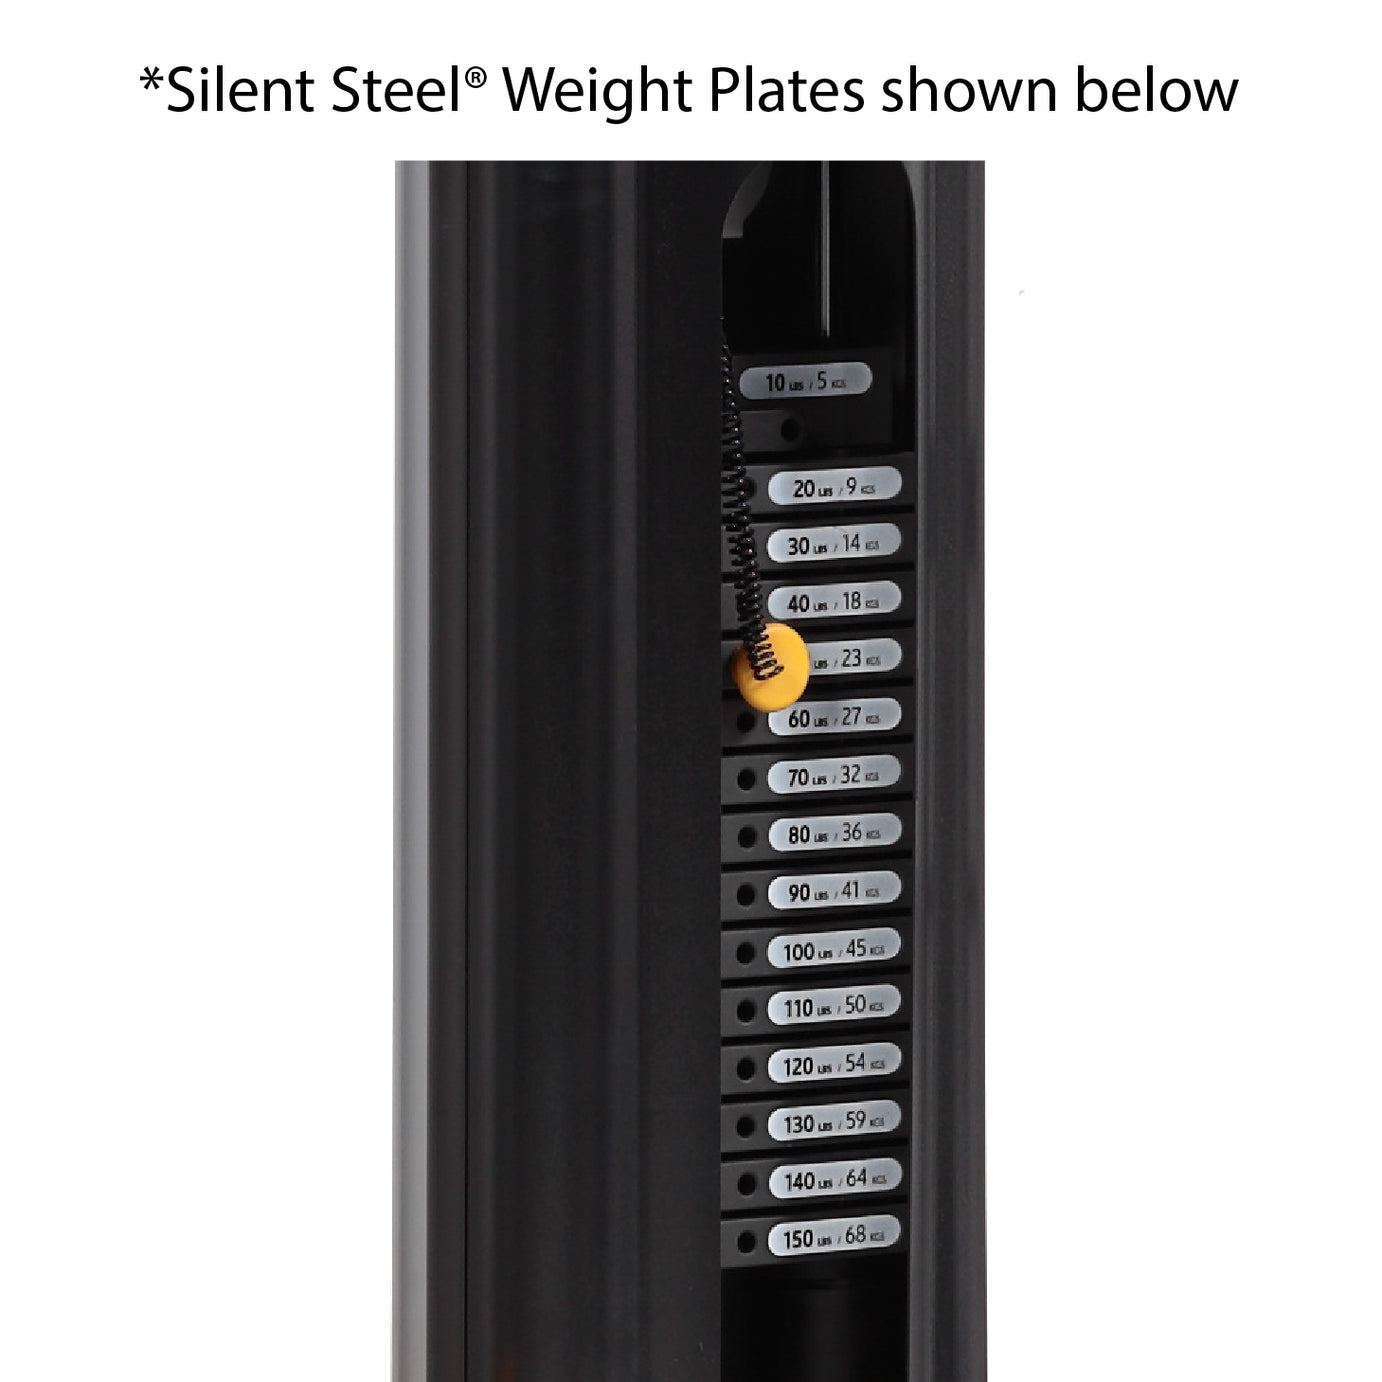 Add-On Weight (Made For Silent Steel Weight Plates) –, 50% OFF